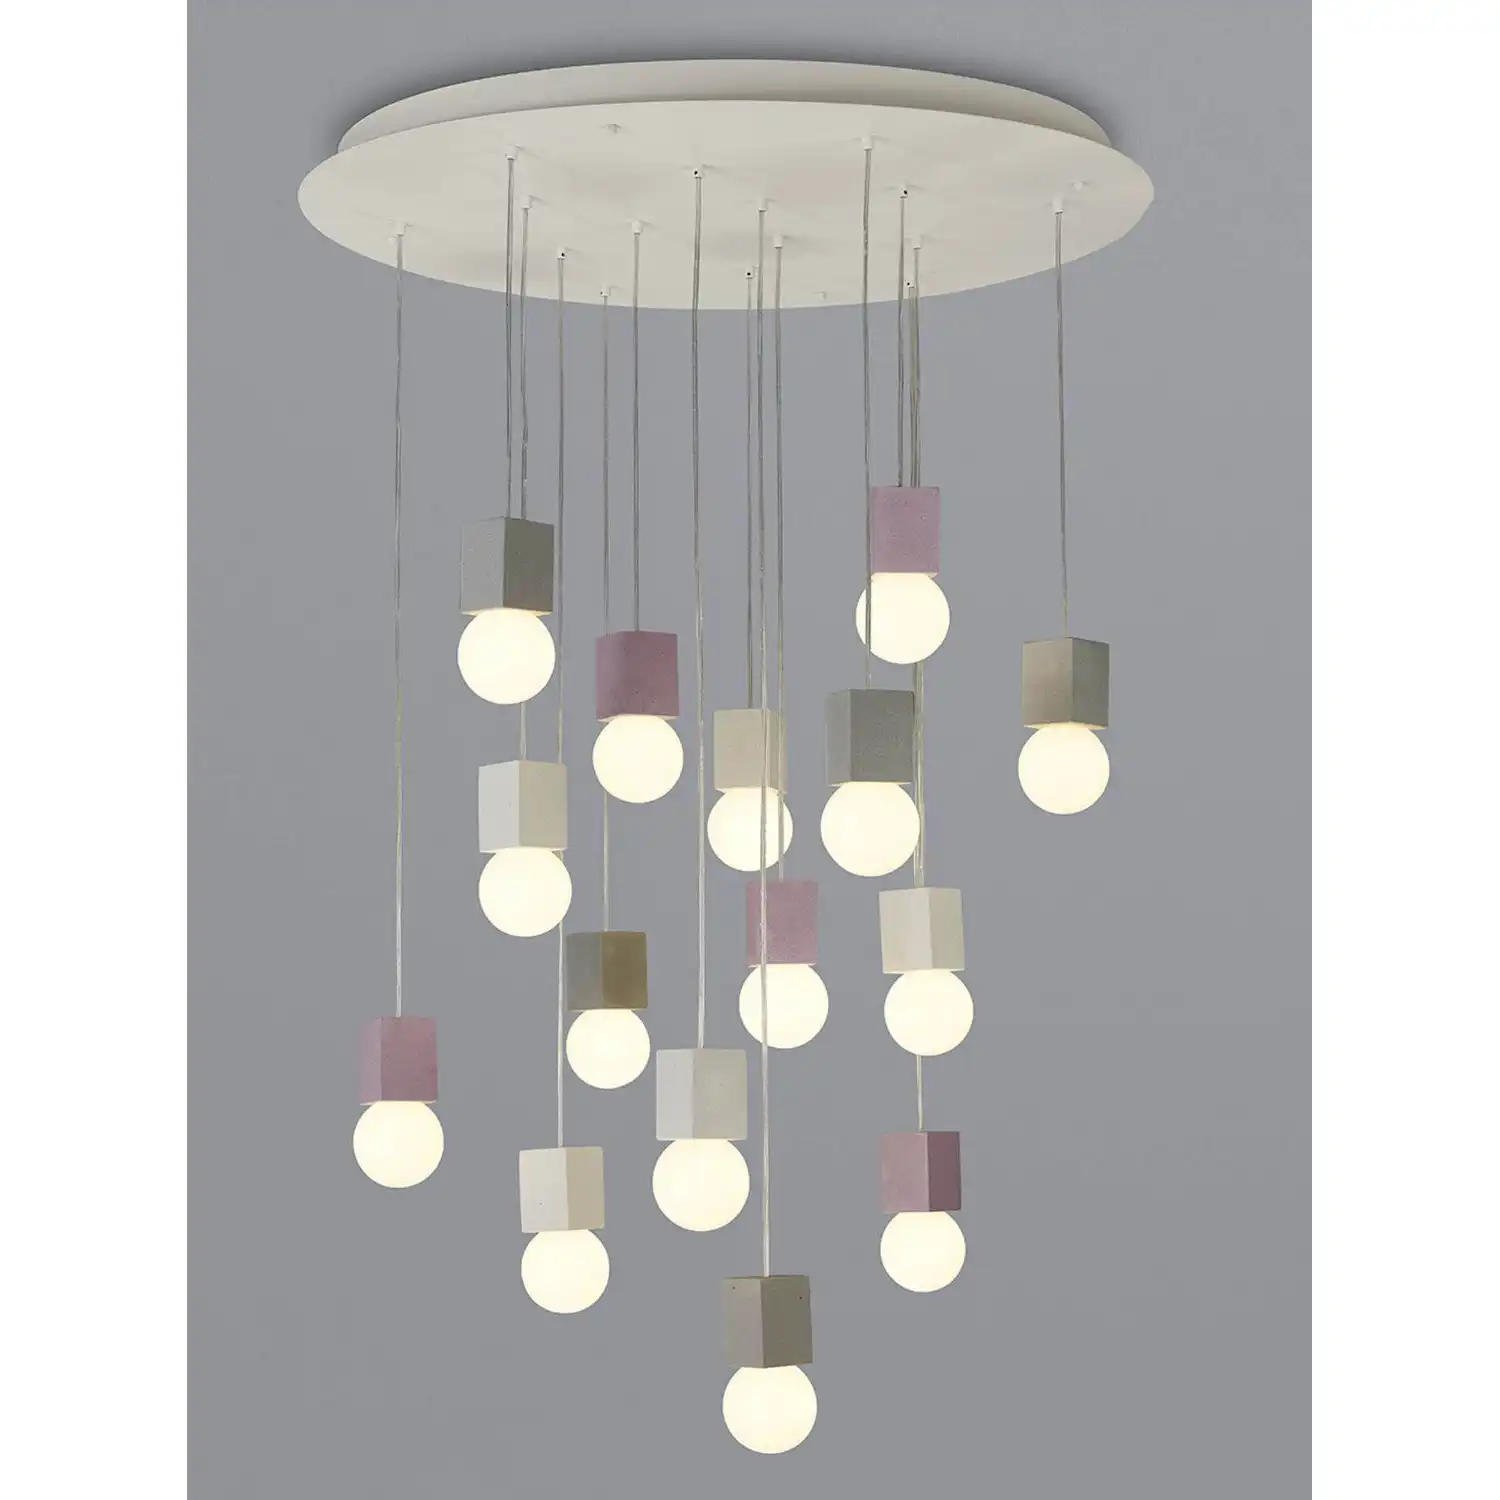 Galaxia Pendant Square, 15 Light E27, White Grey Red Cement, White Base And Cable, Item Weight: 19.4kg